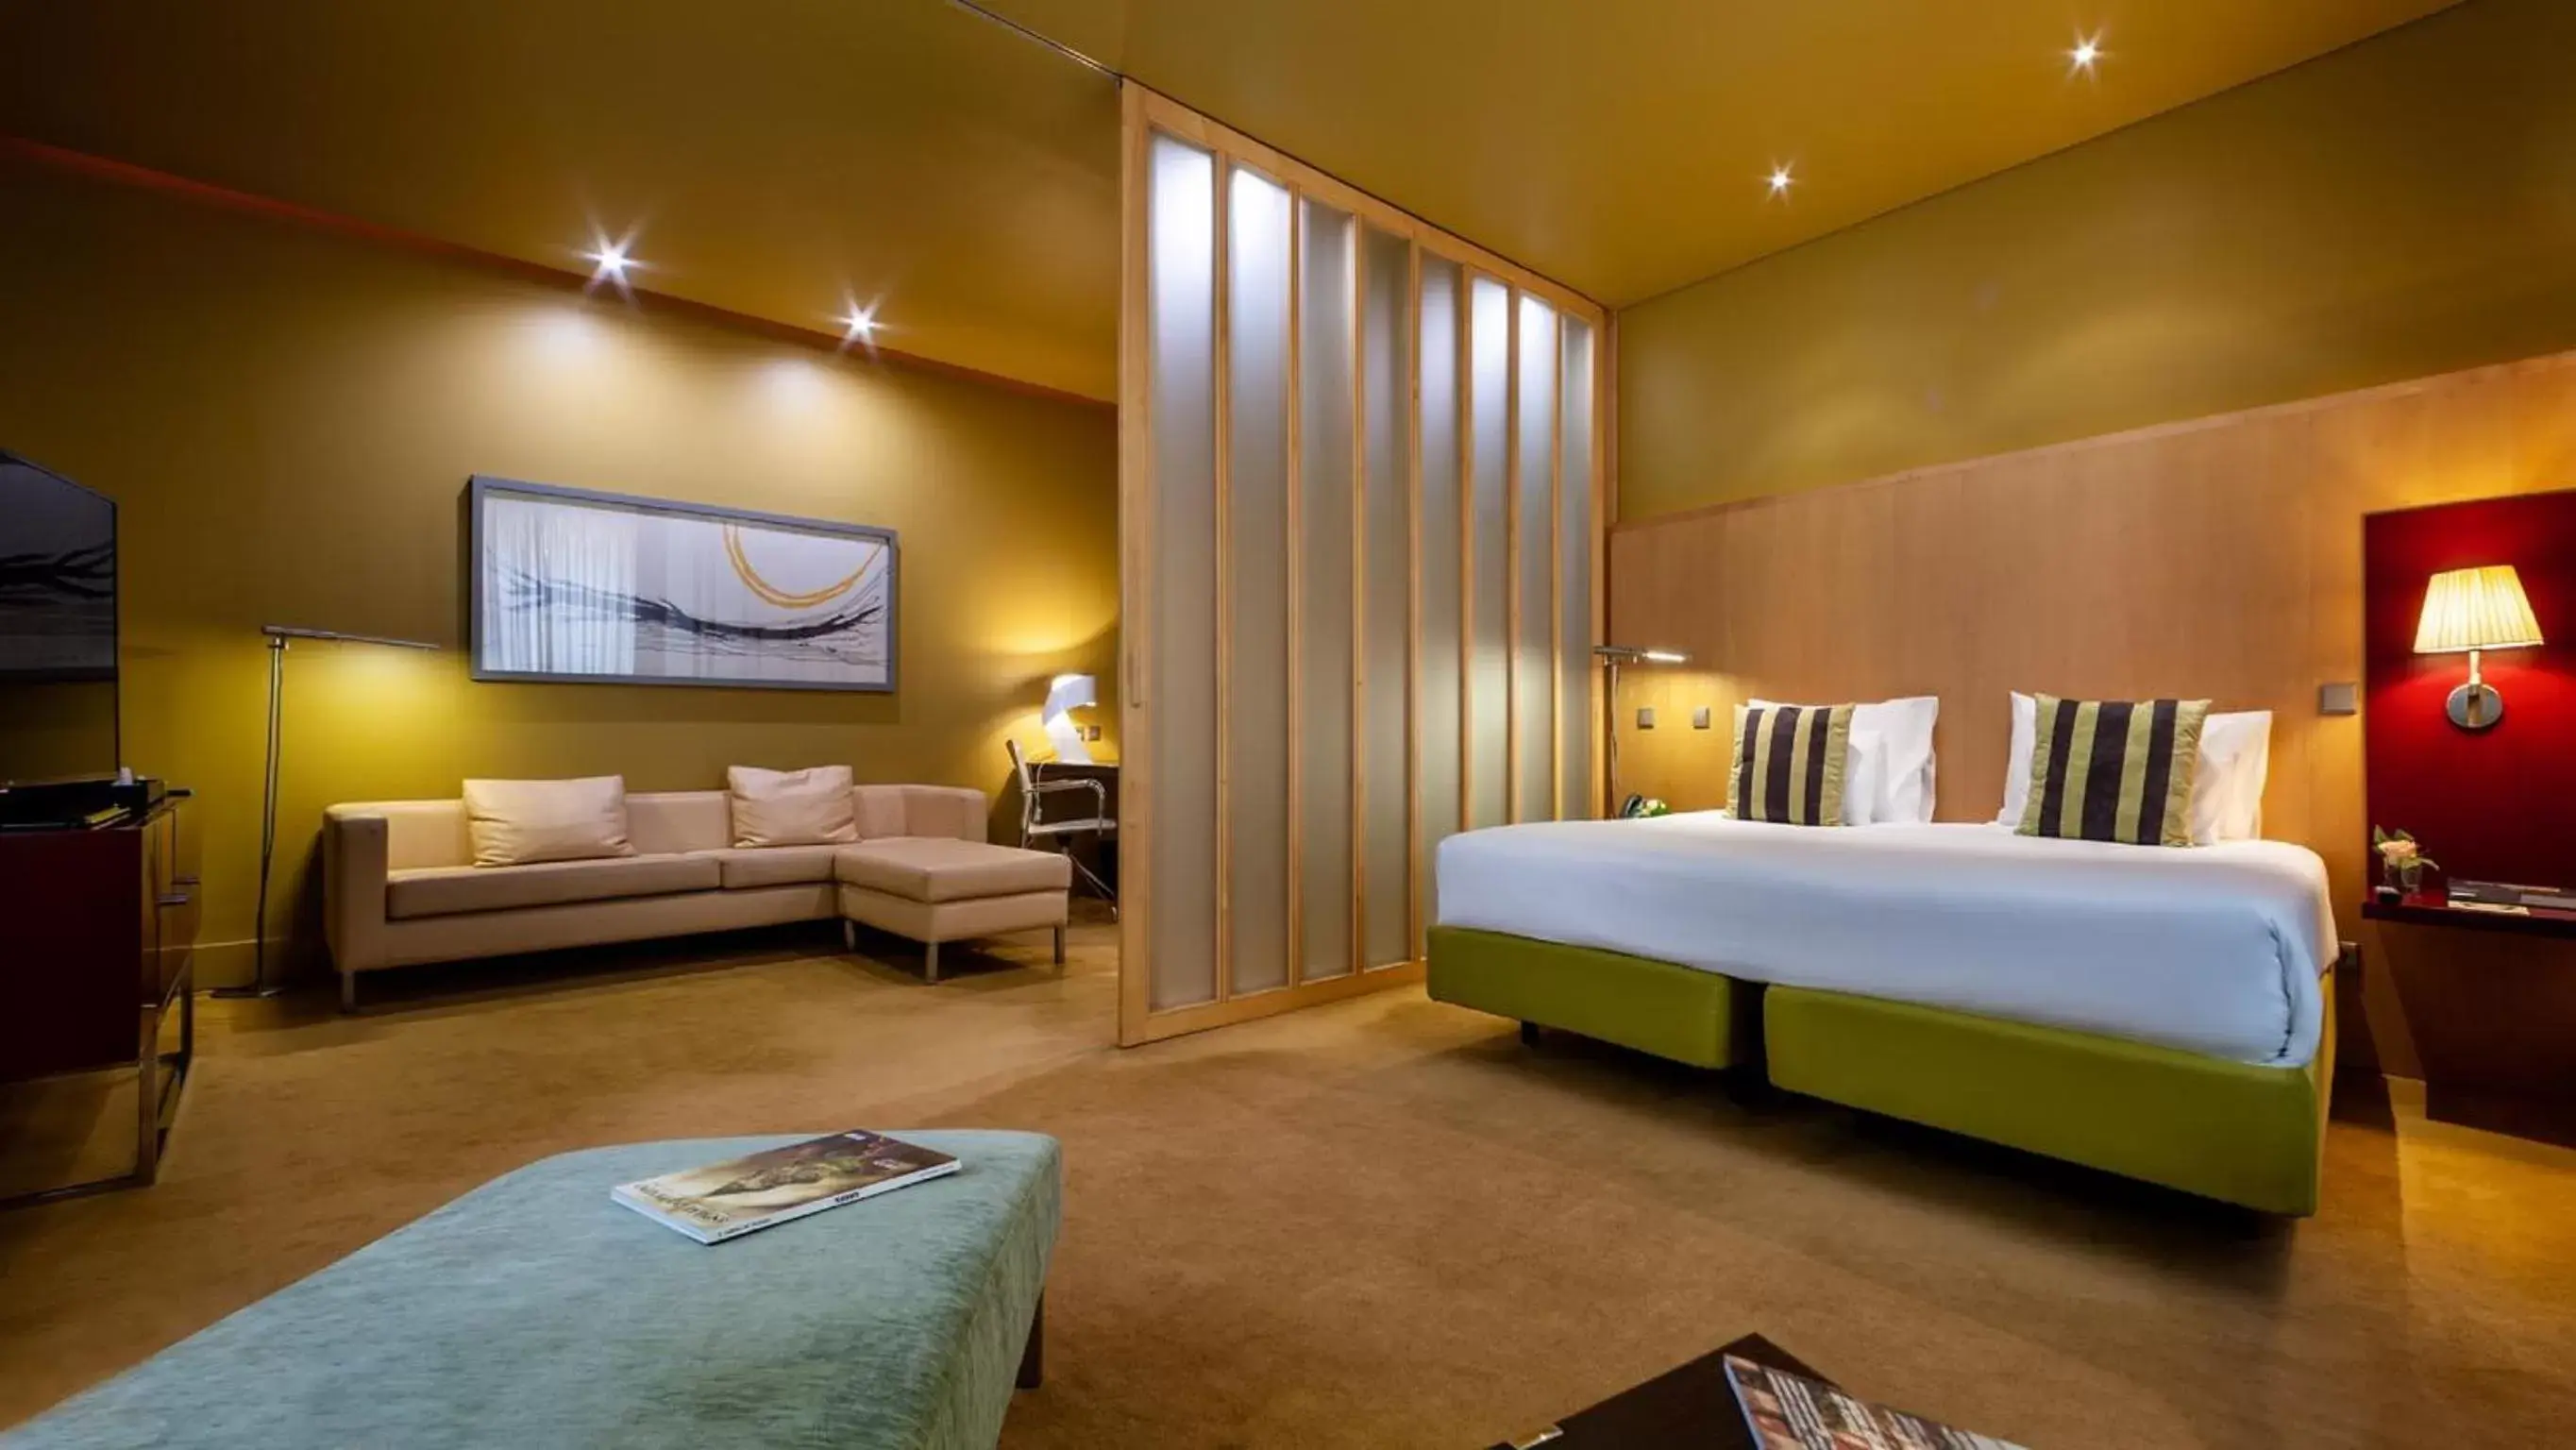 Bedroom, Bed in Pestana Palacio do Freixo, Pousada & National Monument - The Leading Hotels of the World